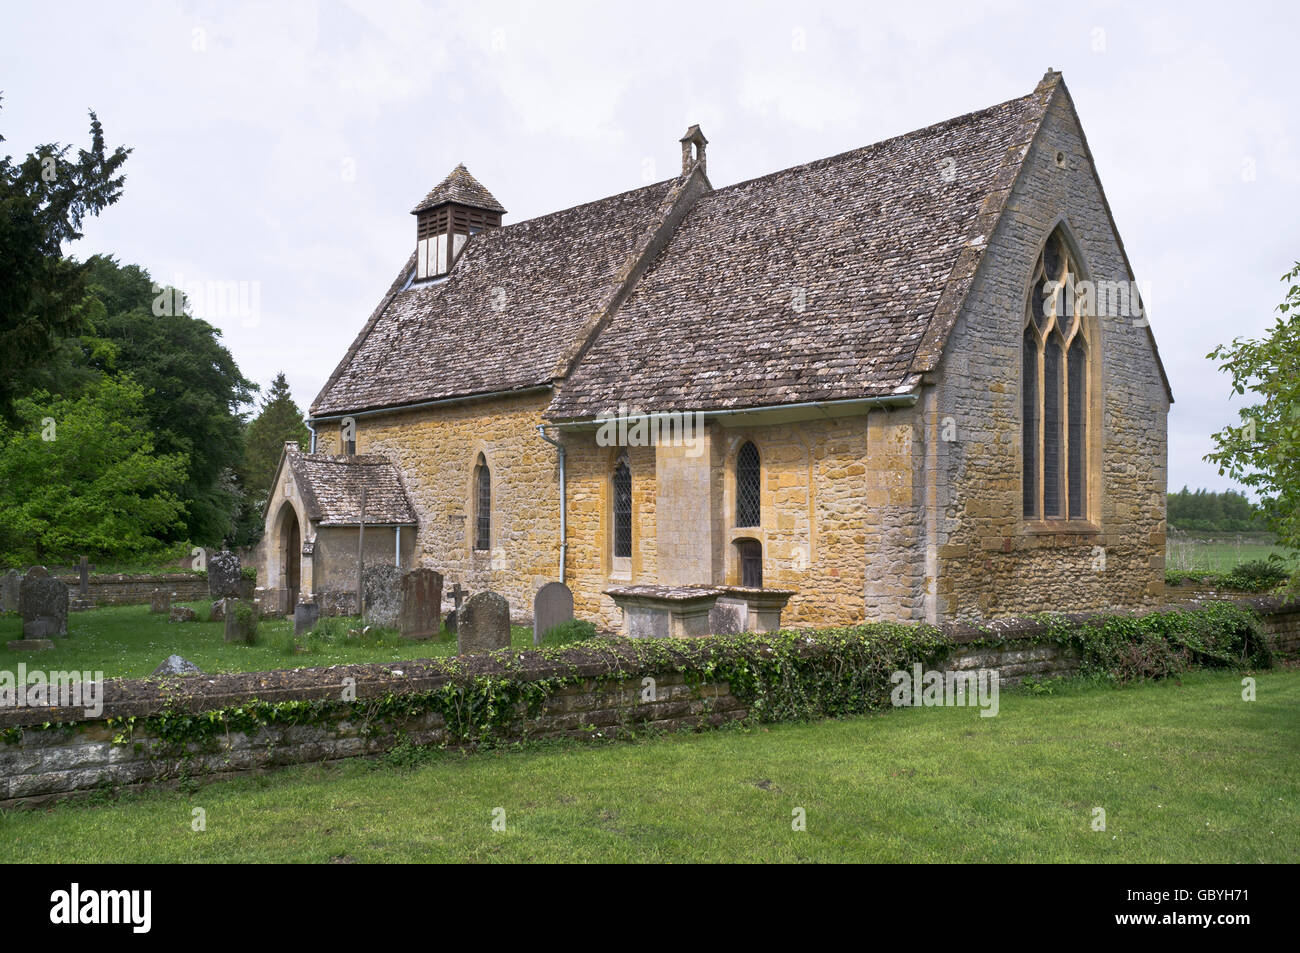 dh England cotswolds HAILES CHURCH GLOUCESTERSHIRE UK Englisch Norman Cotswold Dorfkirchen Stockfoto